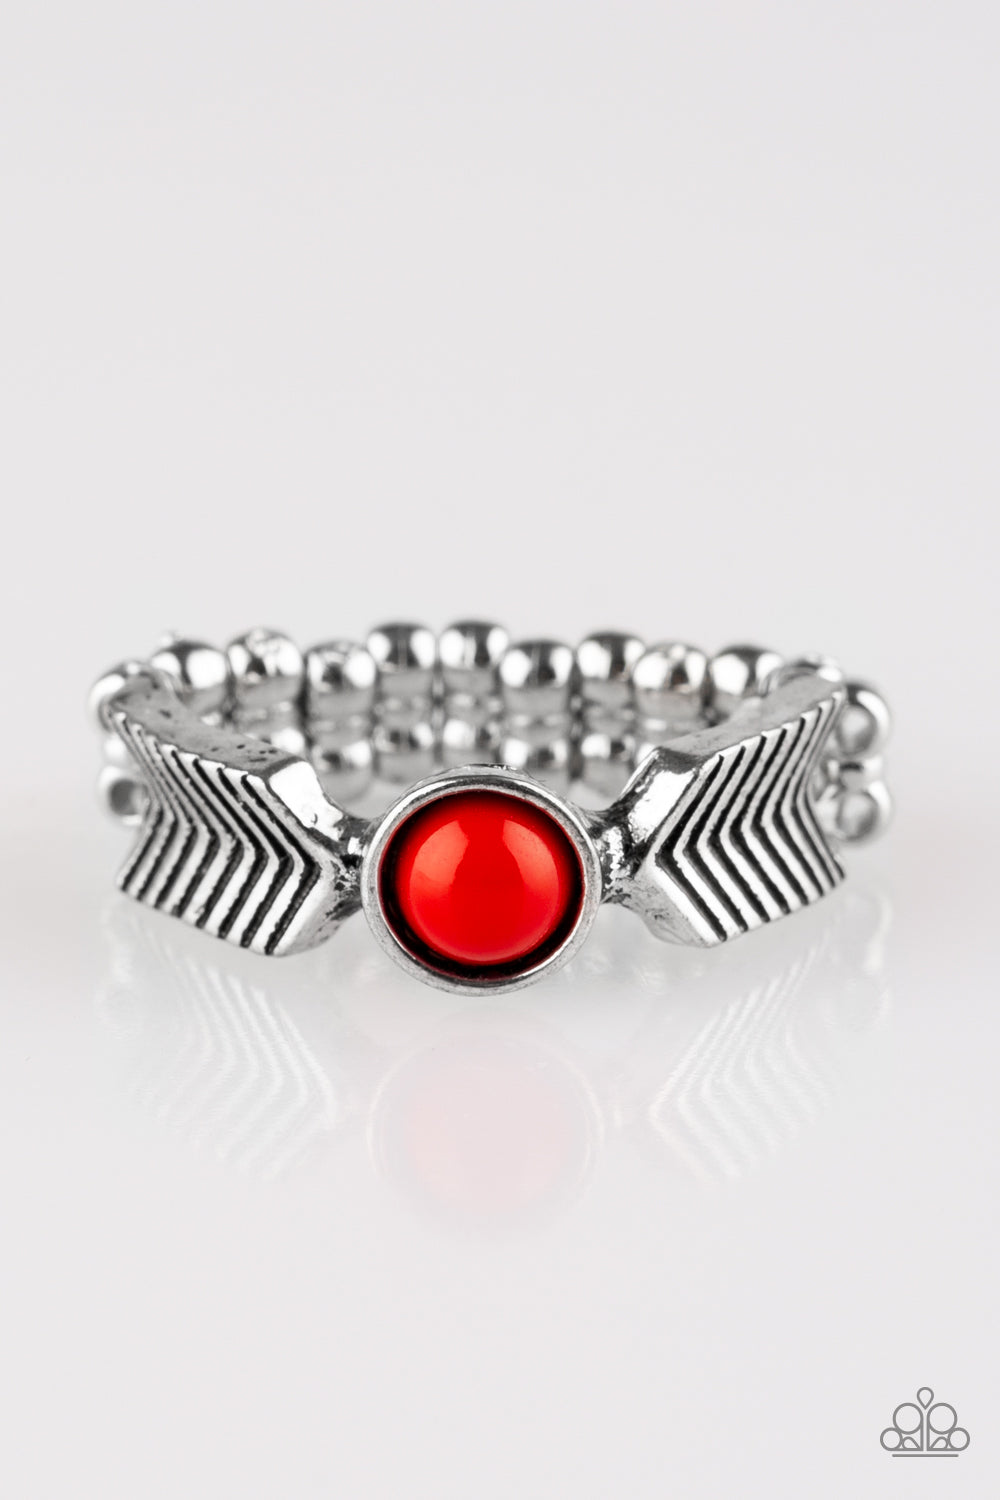 AWESOMELY ARROW-DYNAMIC - RED ARROWS RING